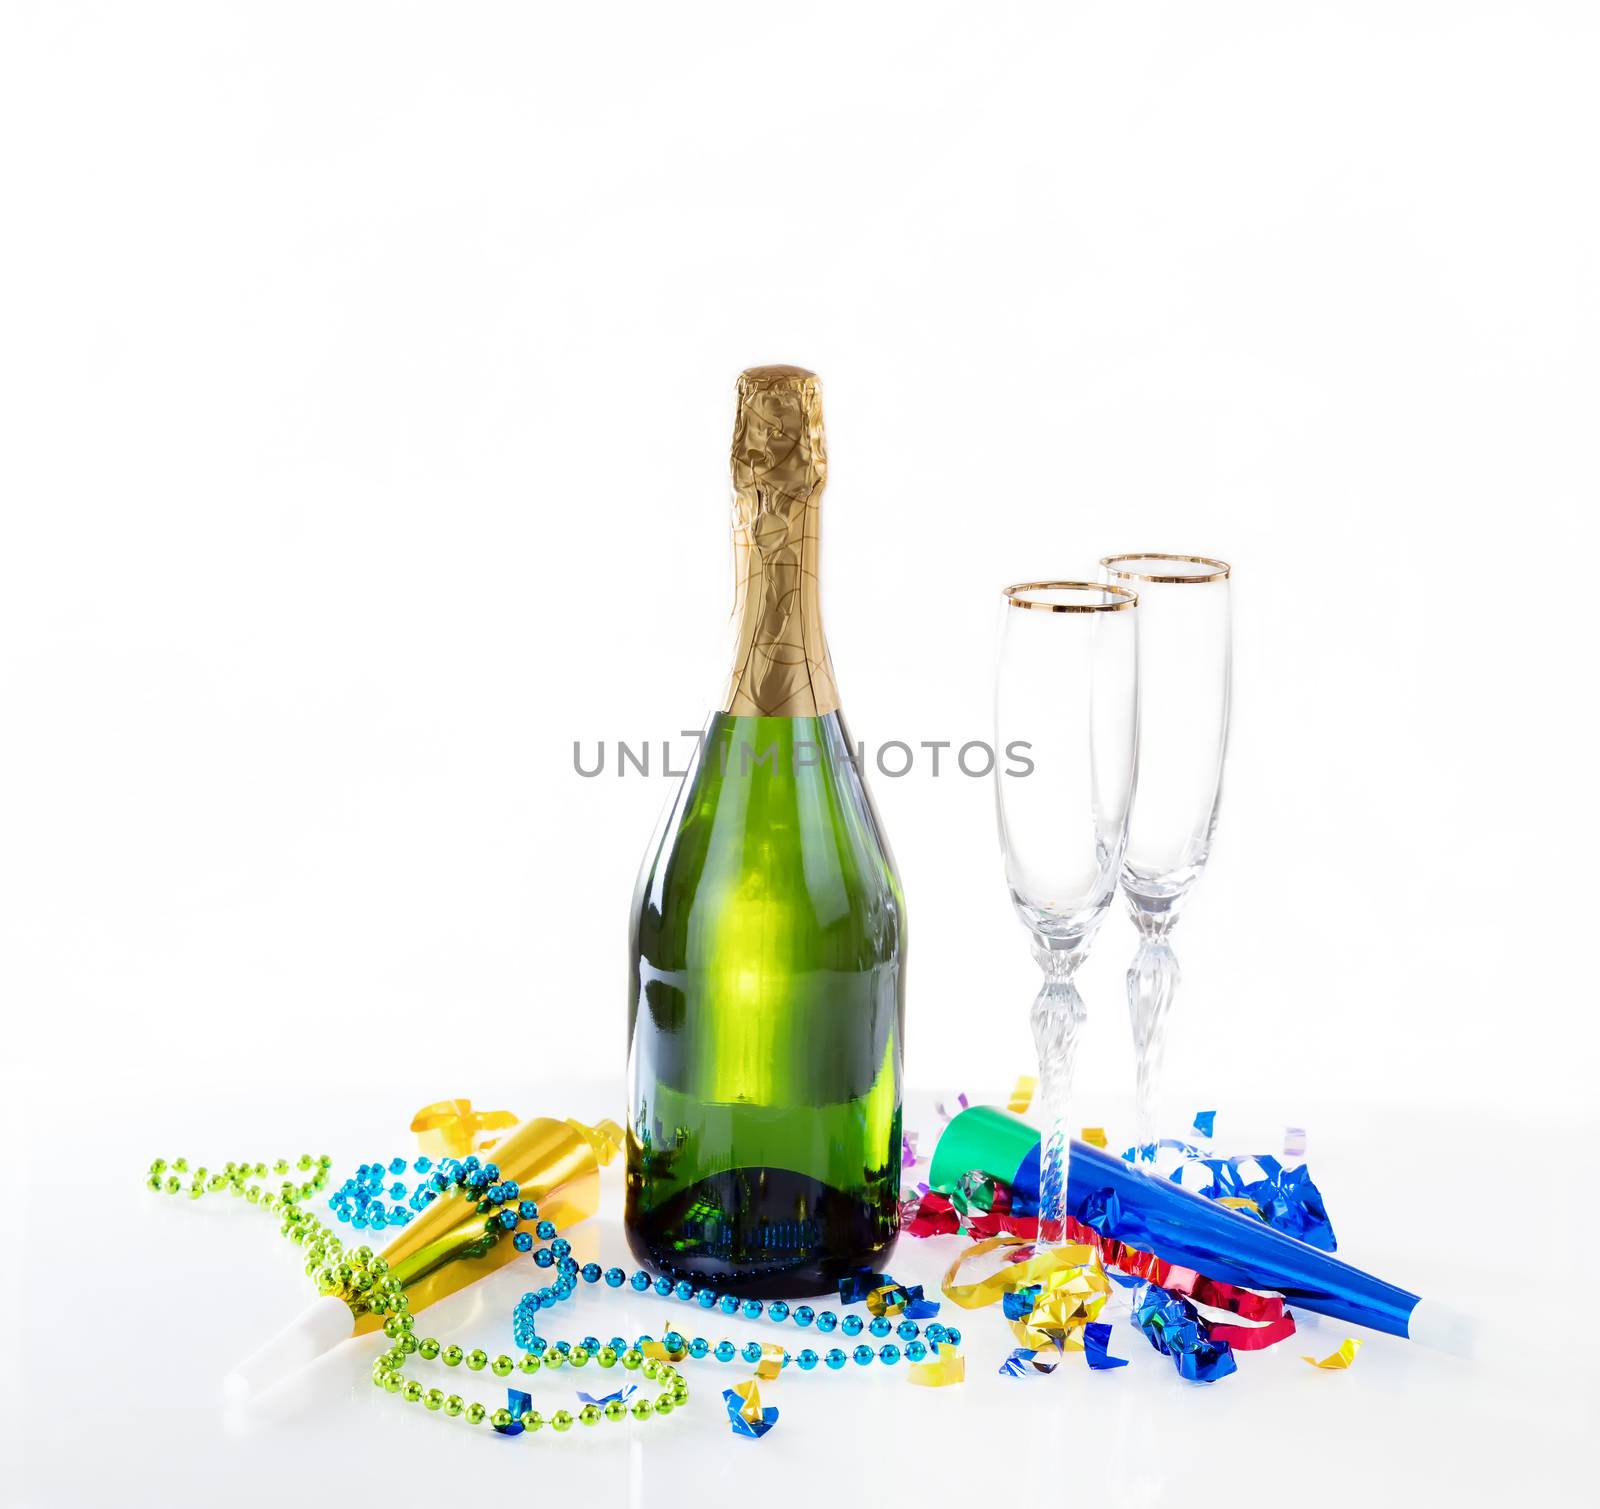 New Year eve party decorations and champagne with drinking glass by tab1962